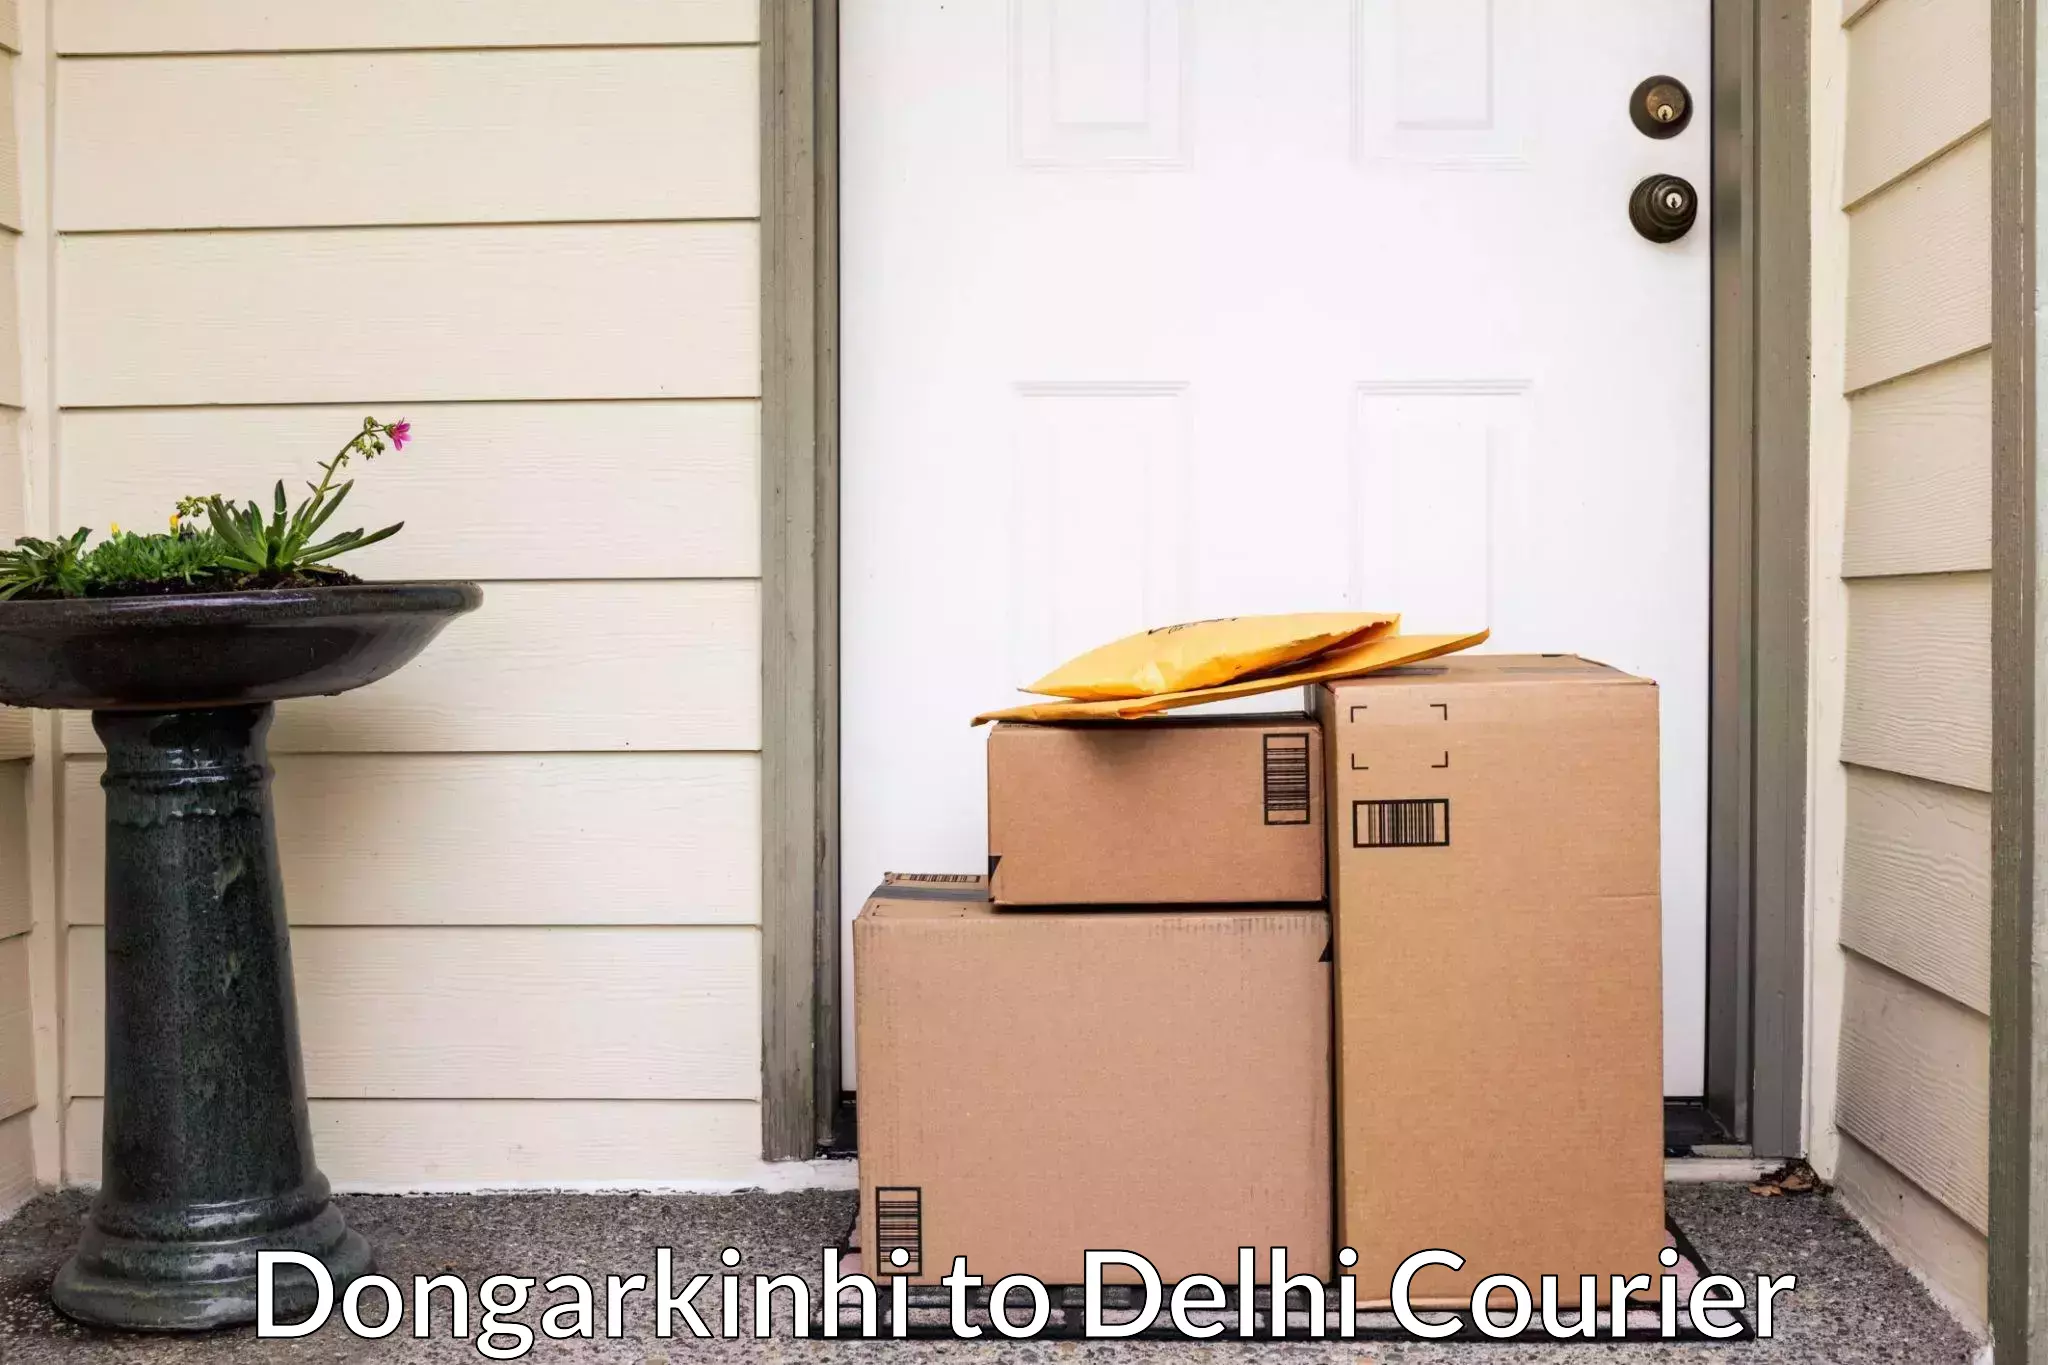 Residential furniture movers Dongarkinhi to Lodhi Road